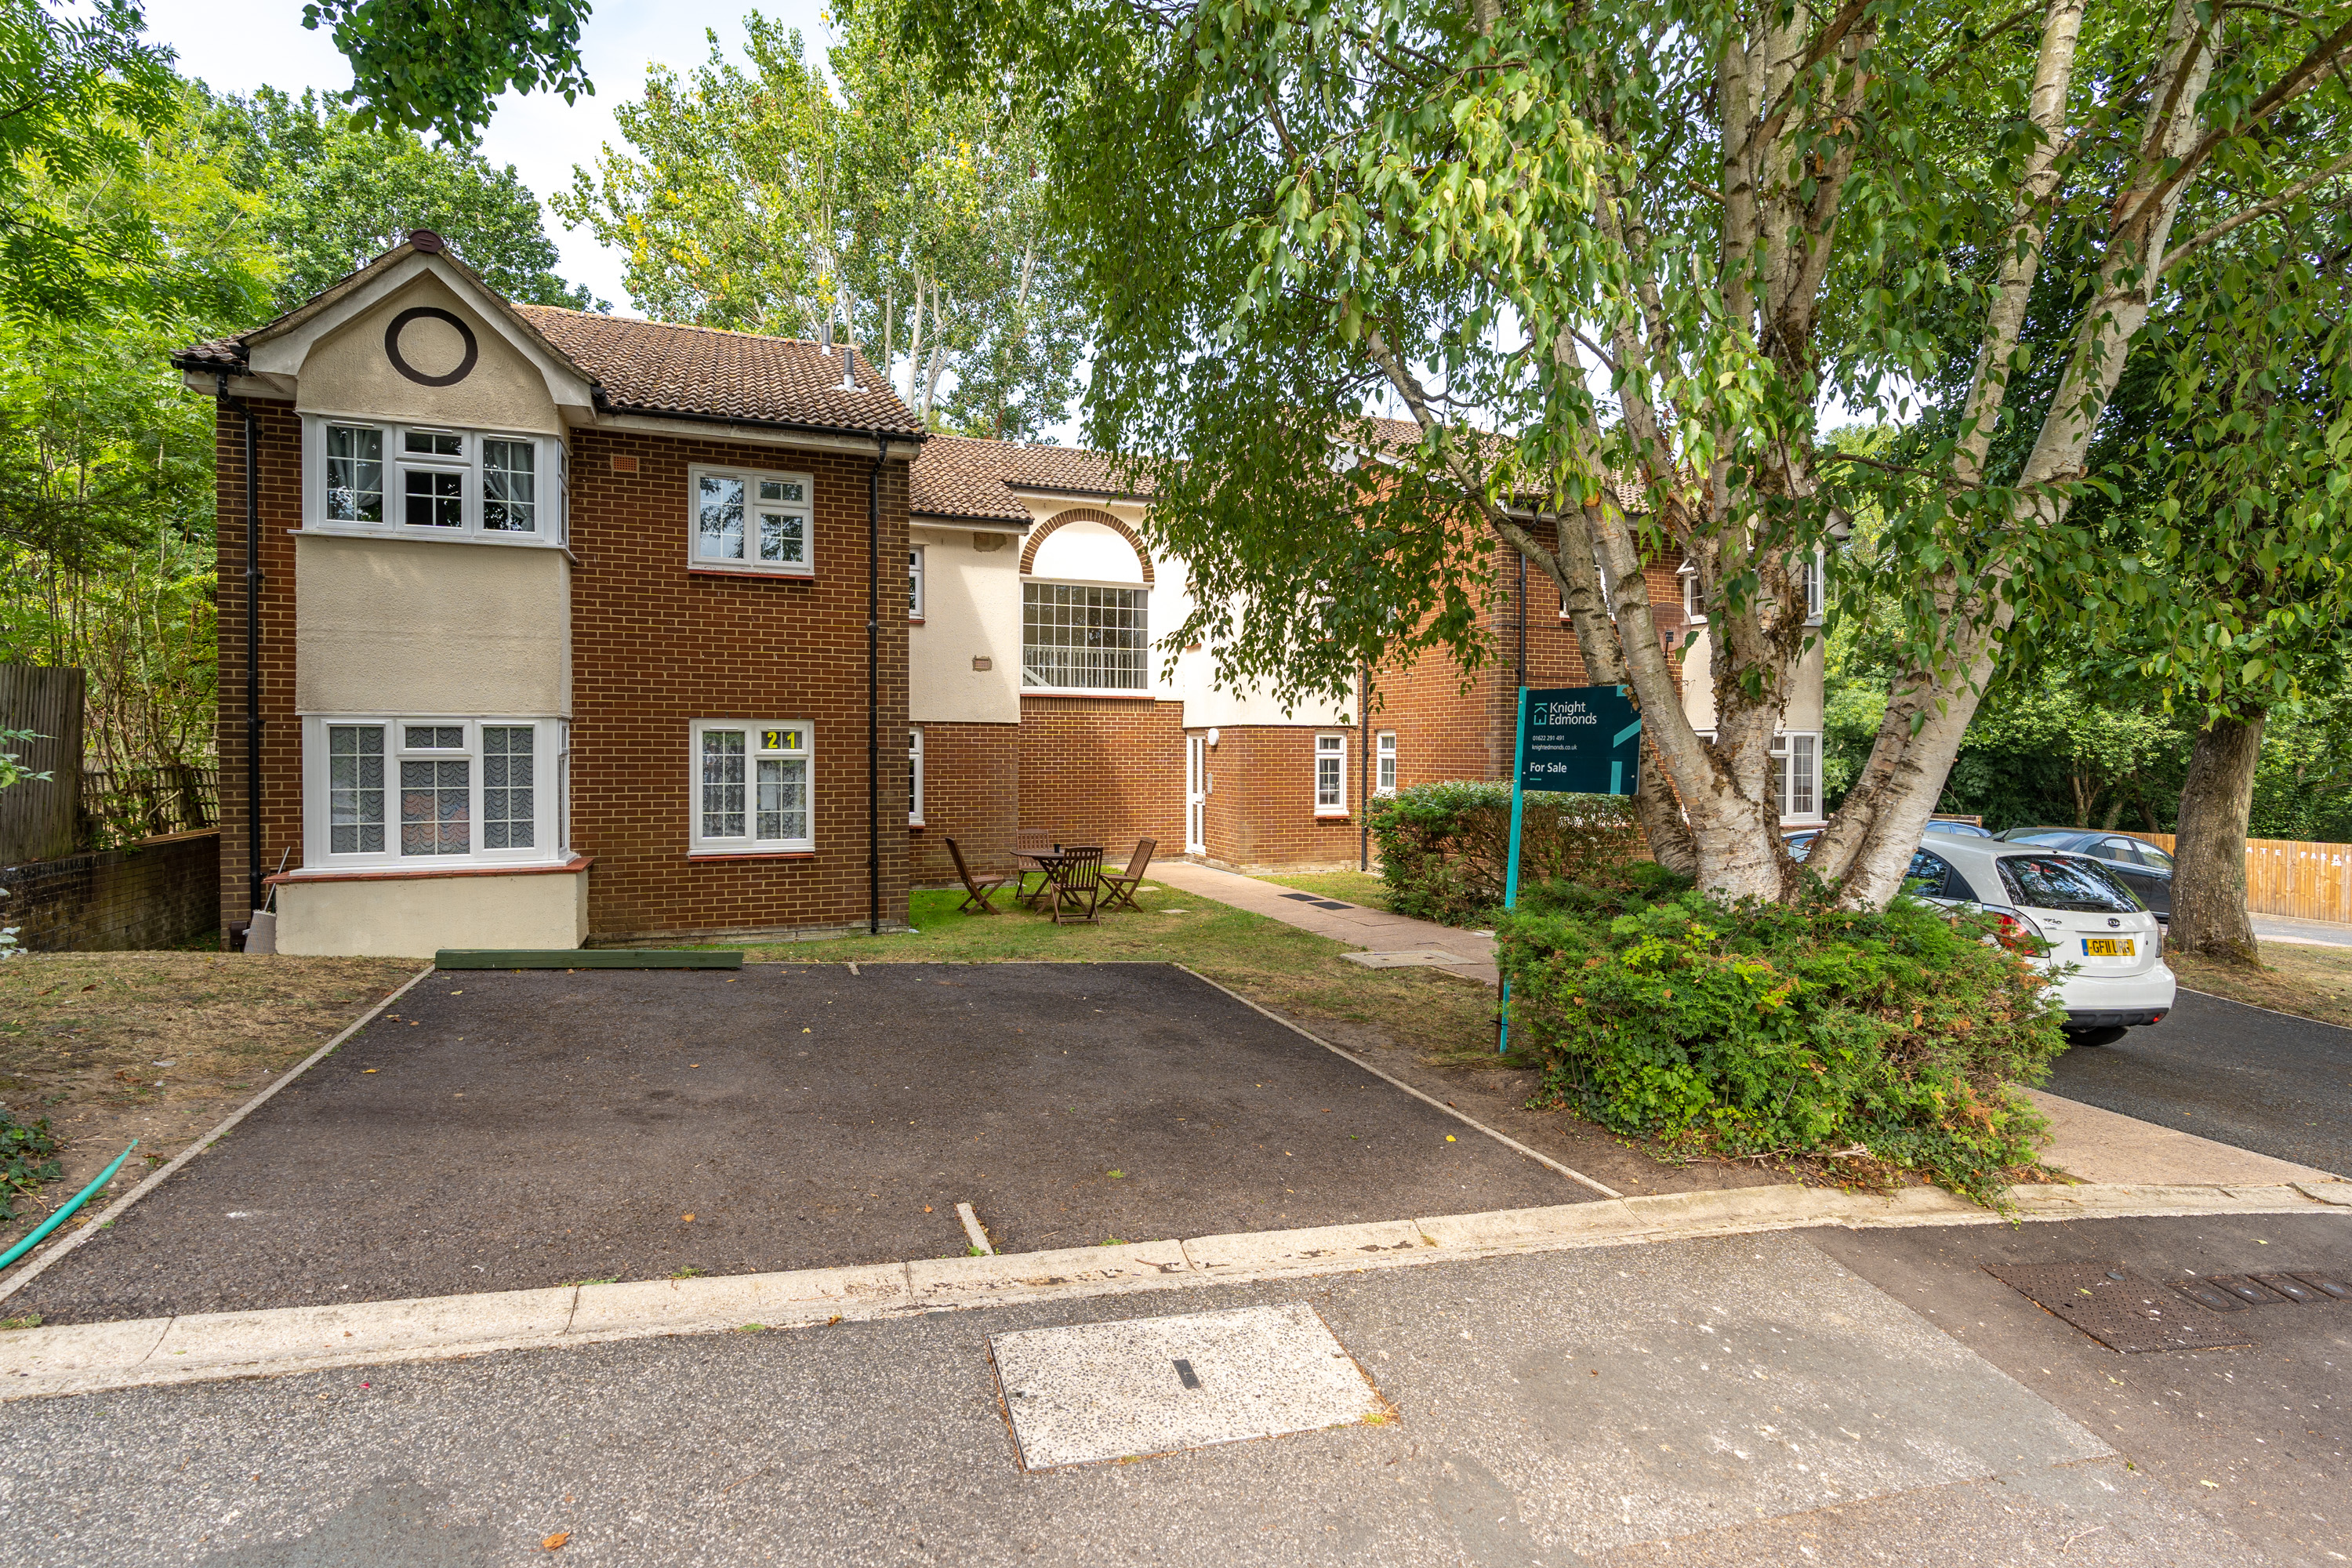 Sold In Your Area; Willow Rise, Maidstone